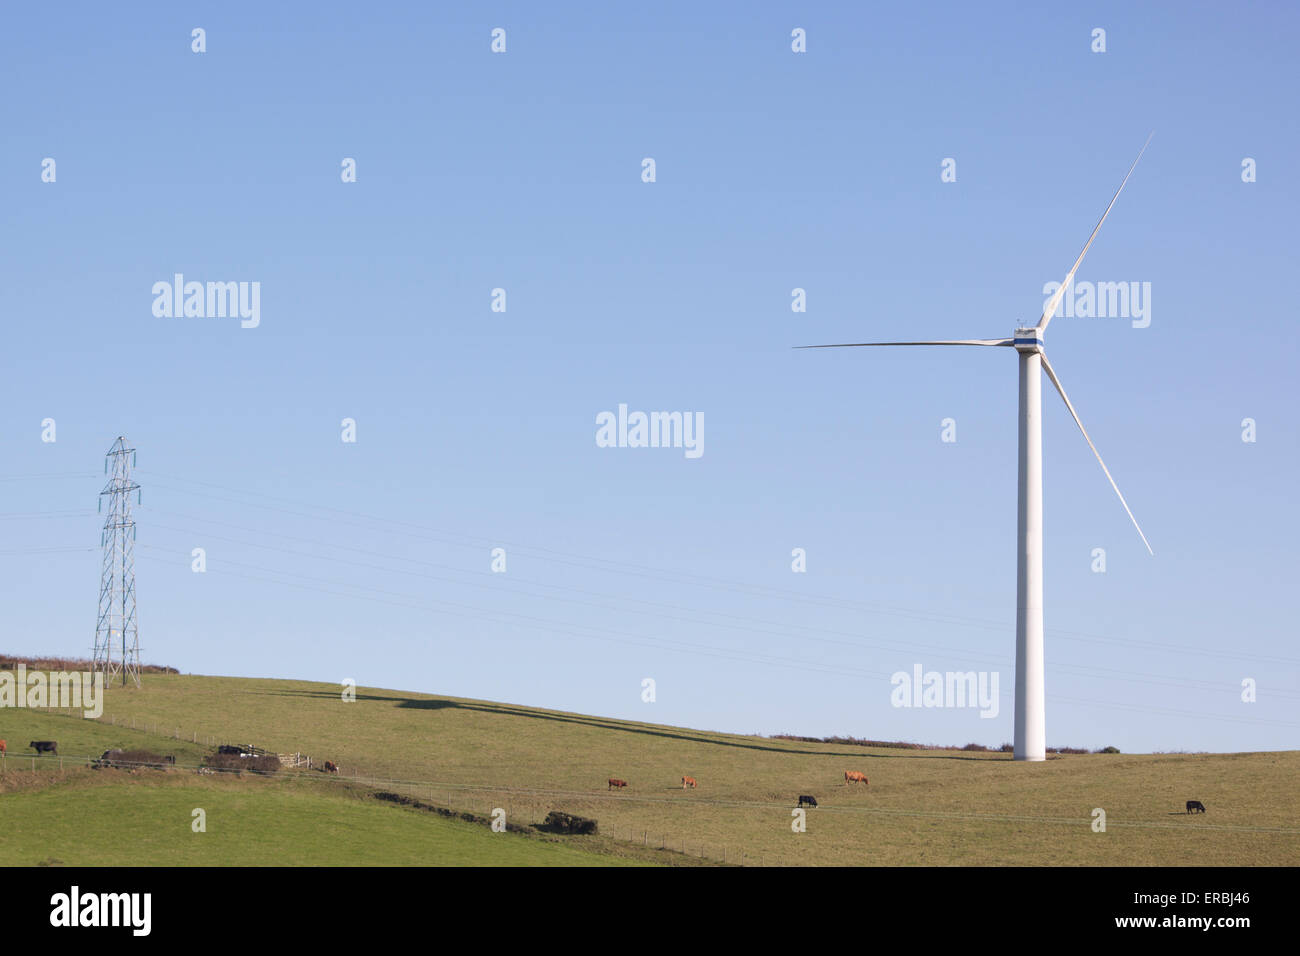 An electricity pylon and a wind turbine in the field Stock Photo